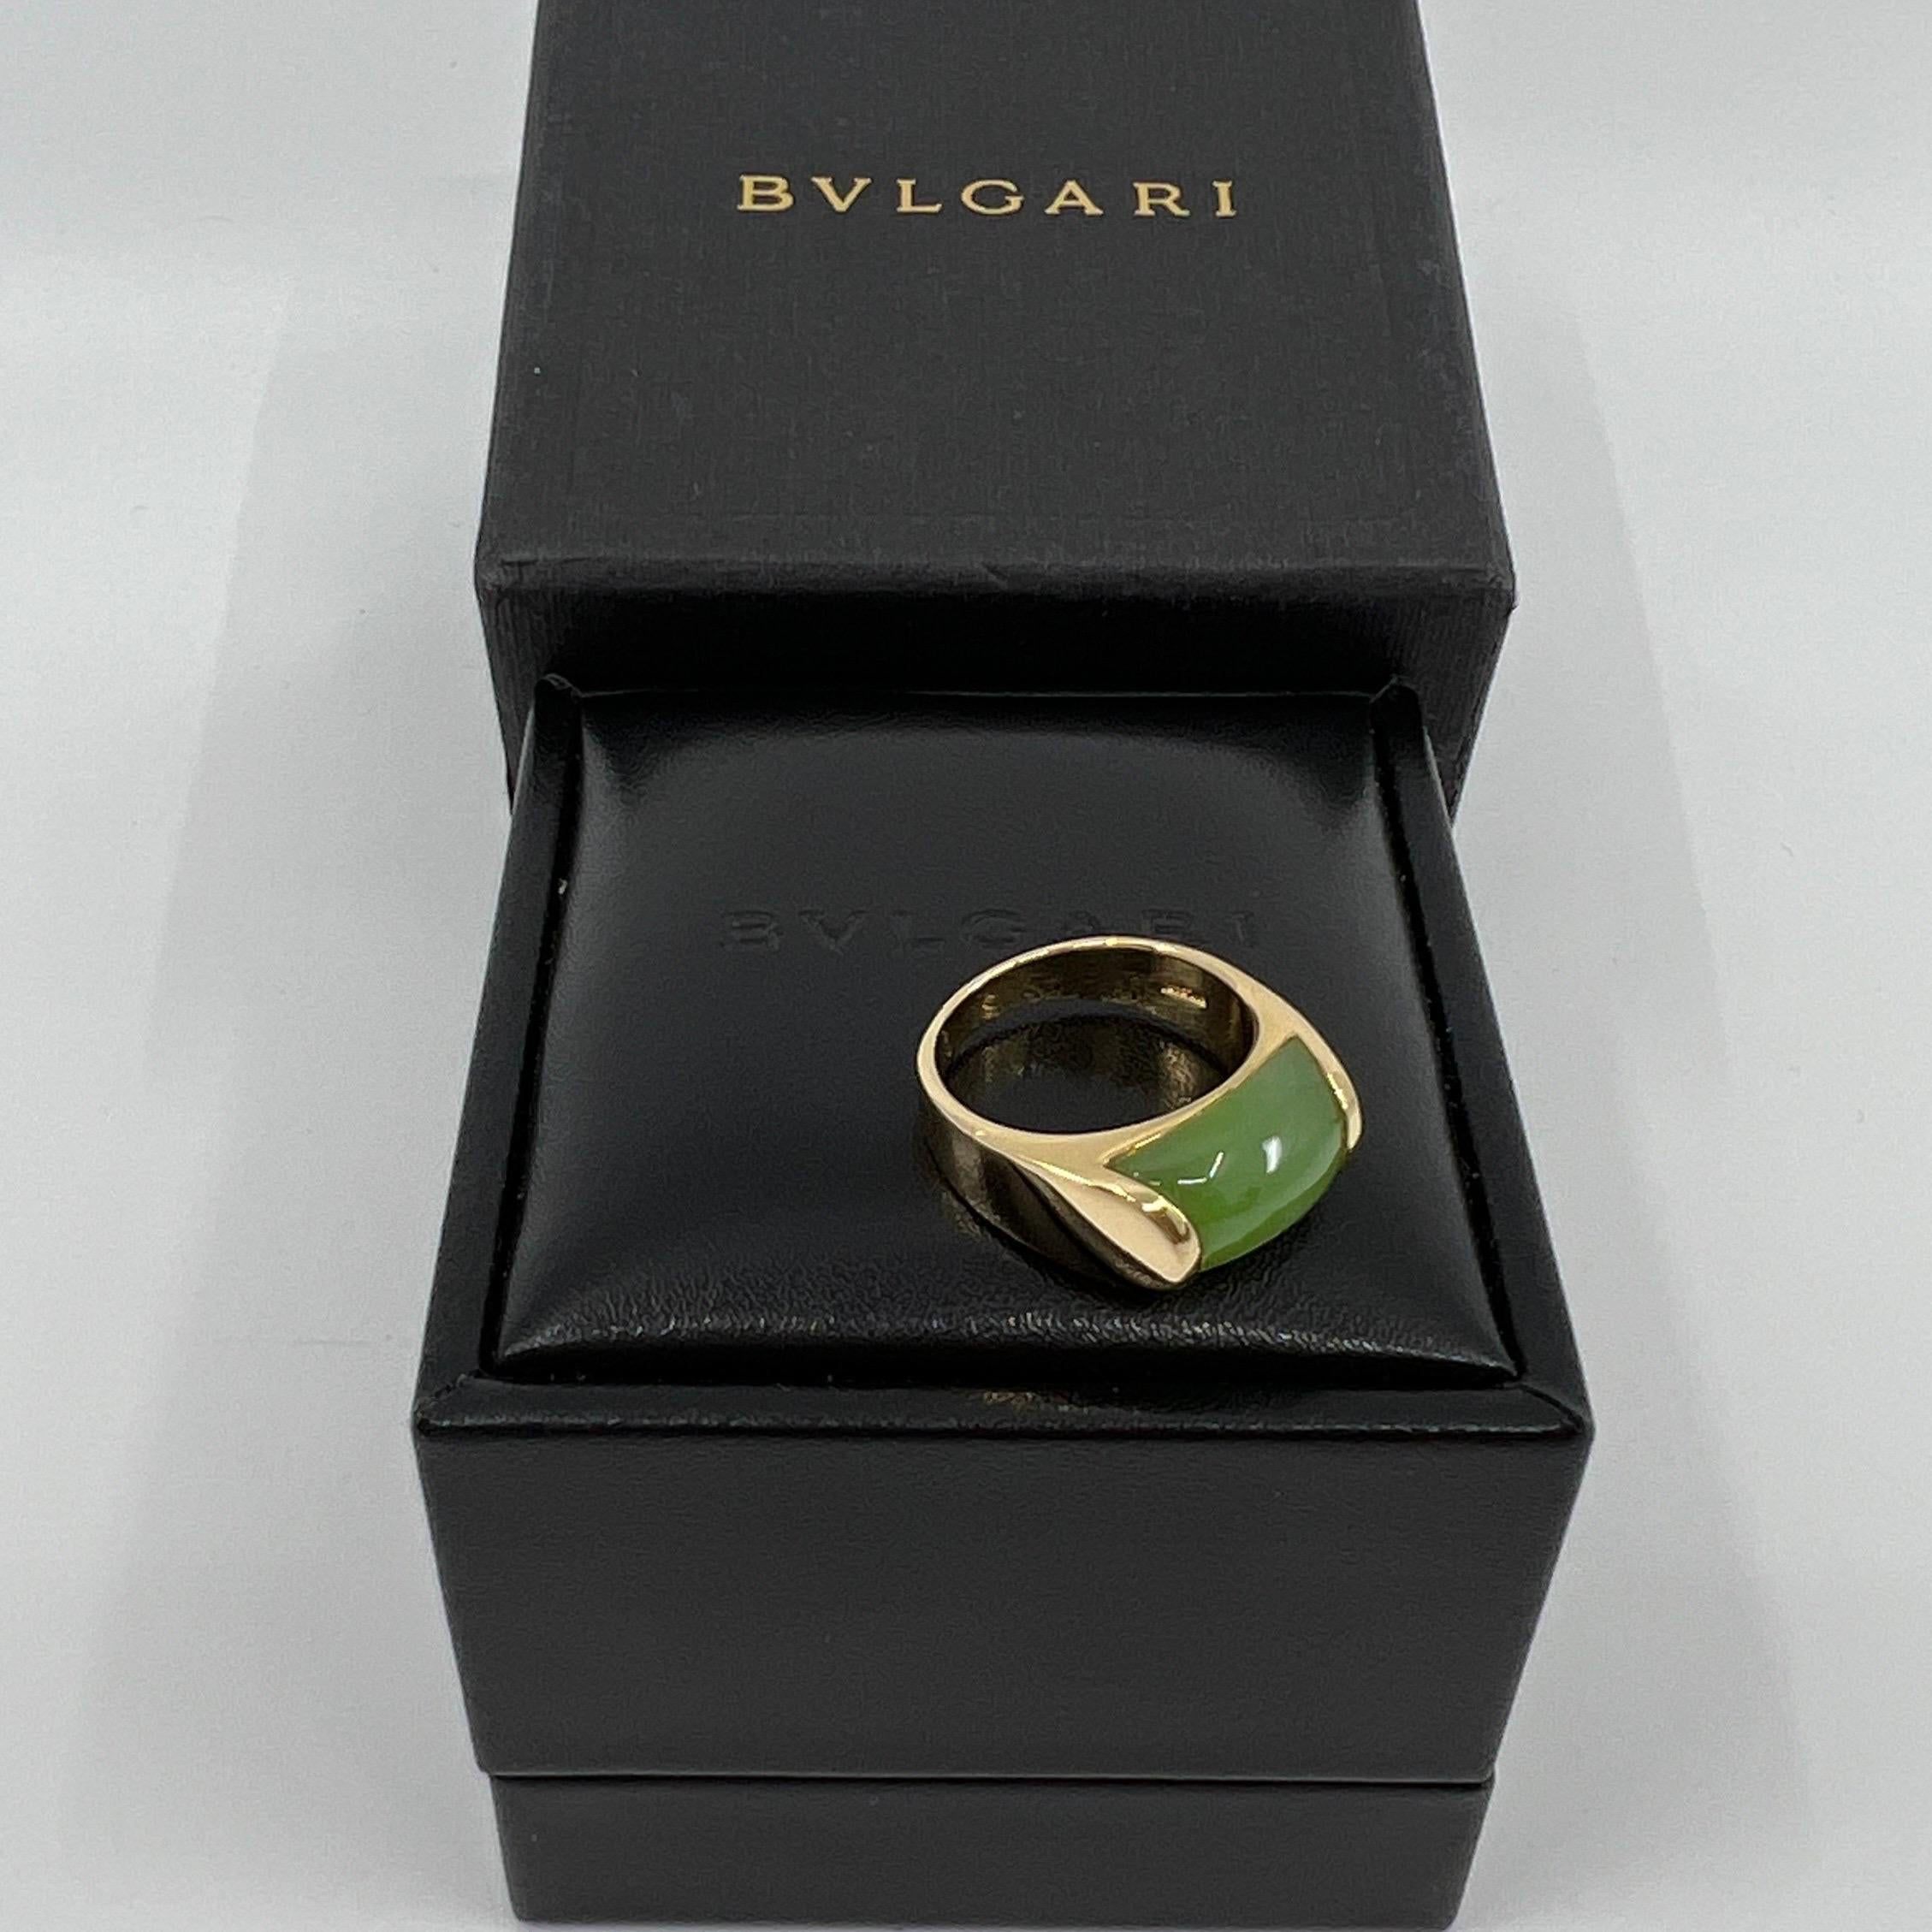 Rare Bvlgari Green Jade Tronchetto 18k Yellow Gold Ring.

Beautiful domed green nephrite jade set in a fine 18k yellow gold tension set ring. A very rare piece by bvlgari, we have not seen a jade tronchetto ring like this before.

In excellent